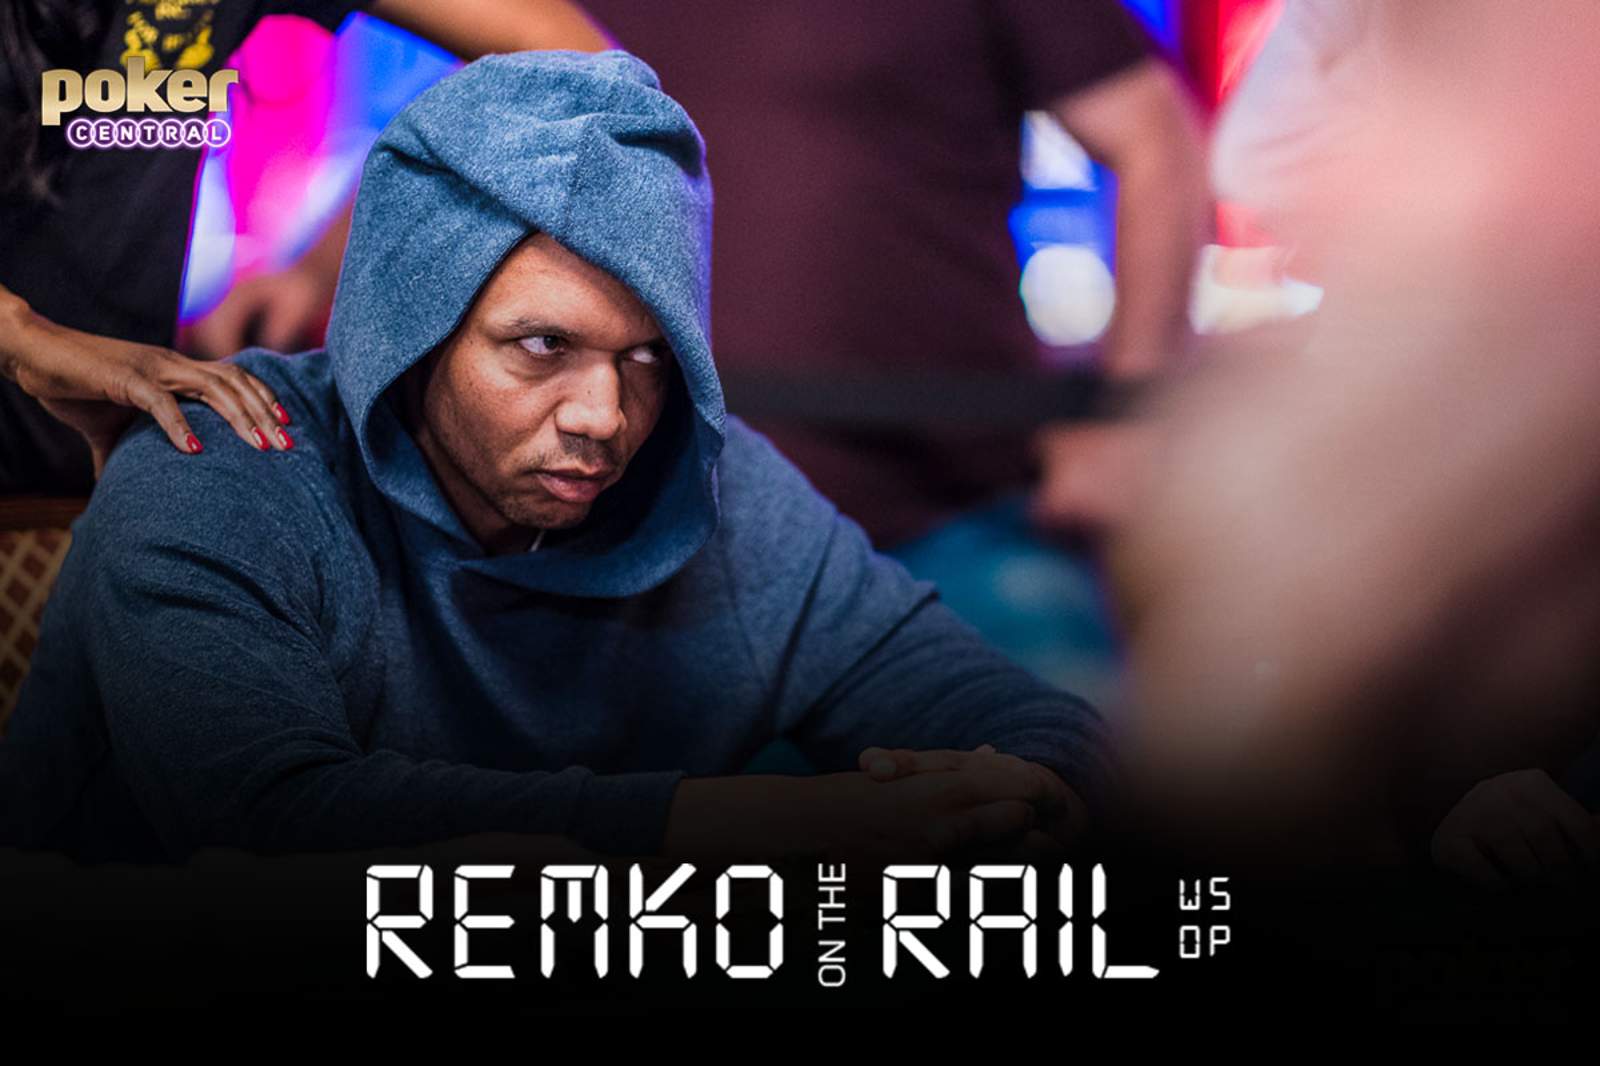 Remko on the Rail: An Open Letter to Phil Ivey